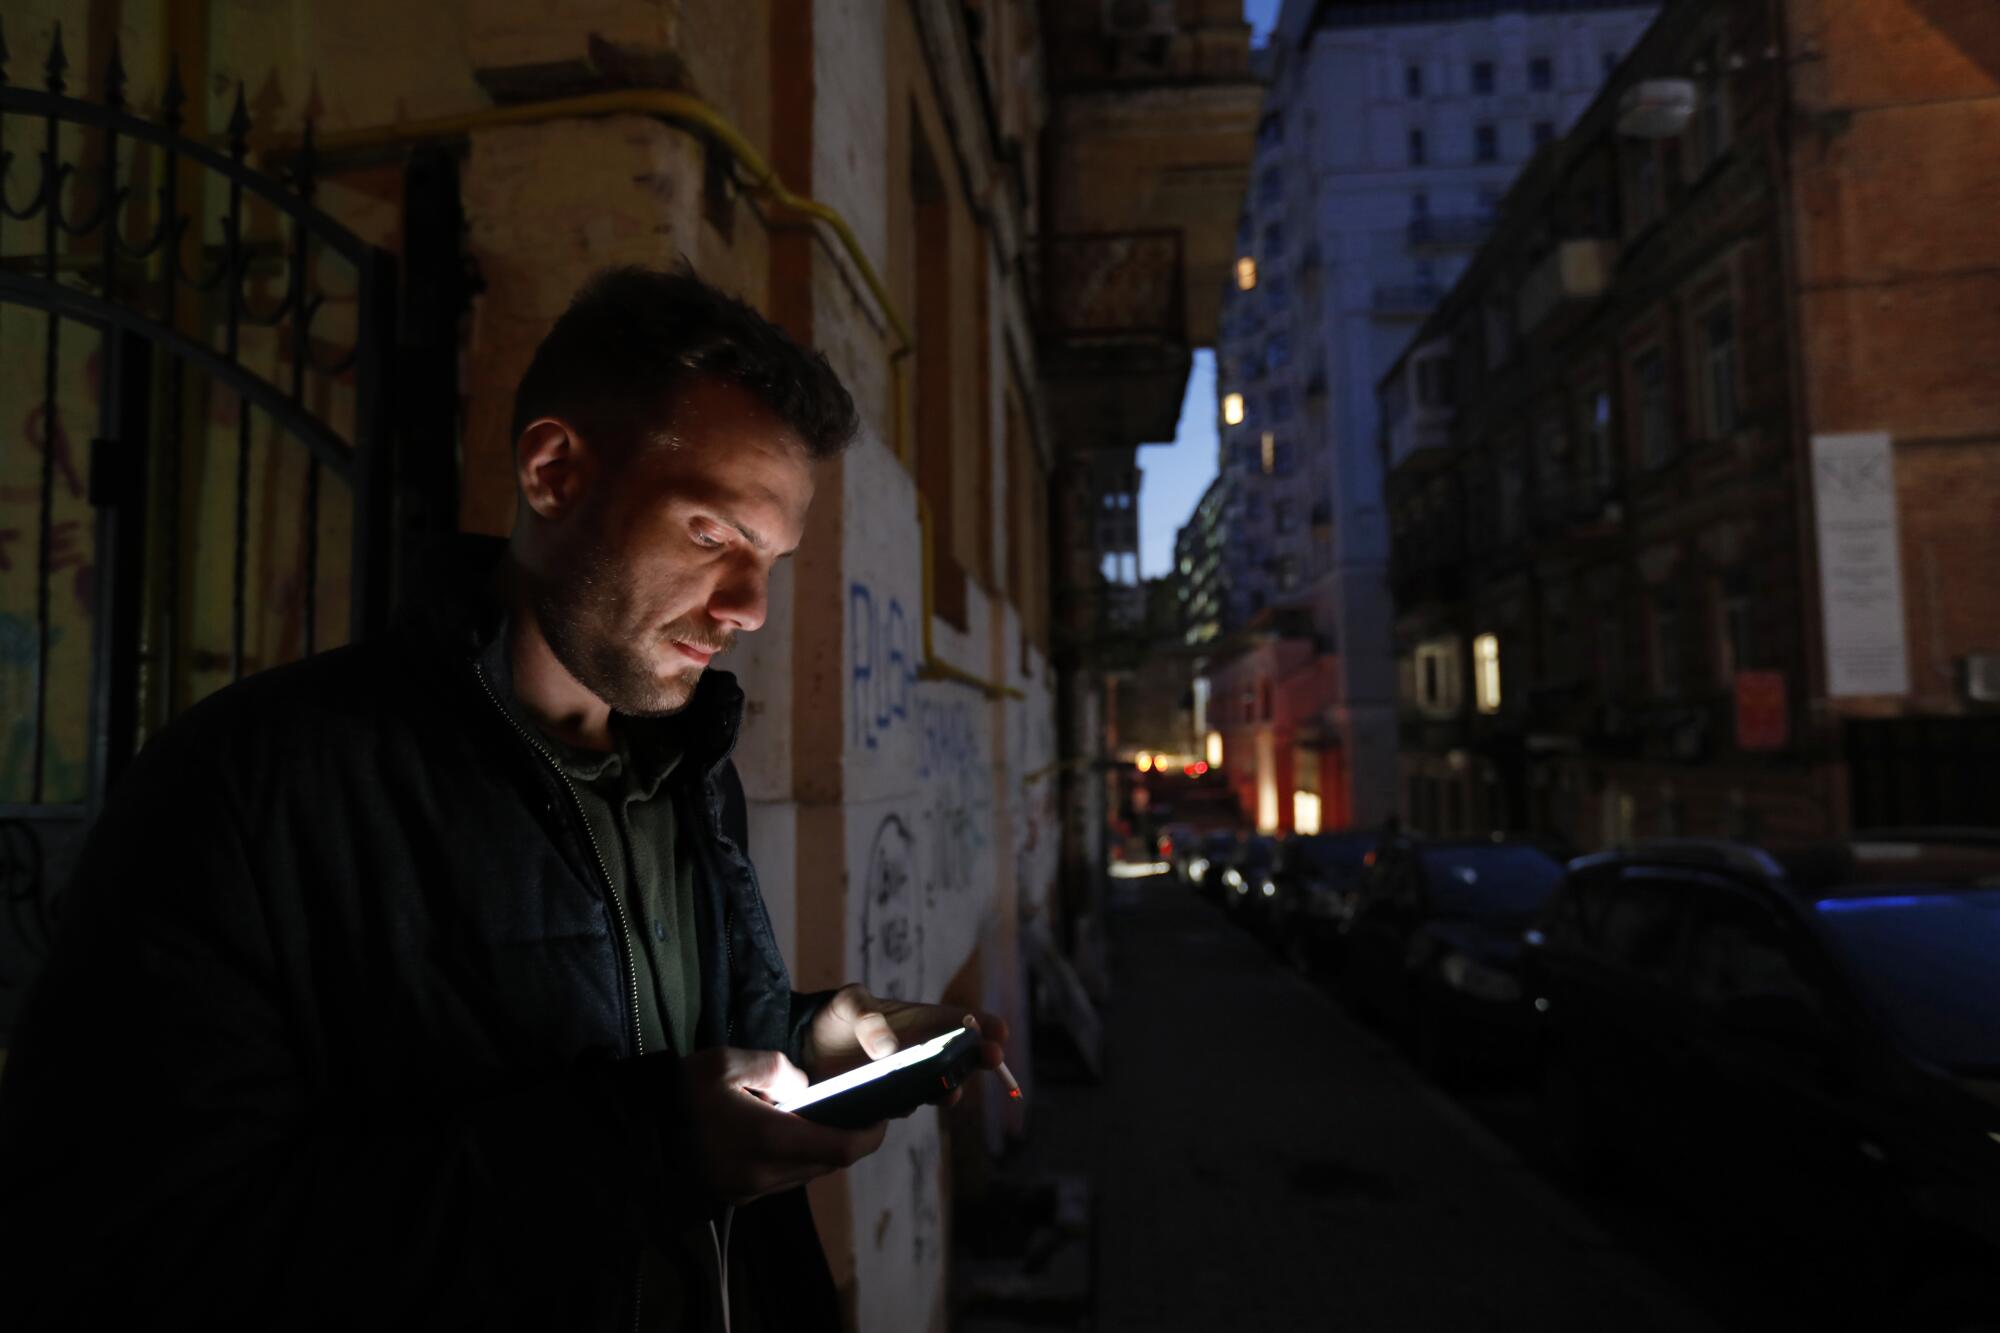 A man holding a cellphone and cigarette on a darkened city street at dusk